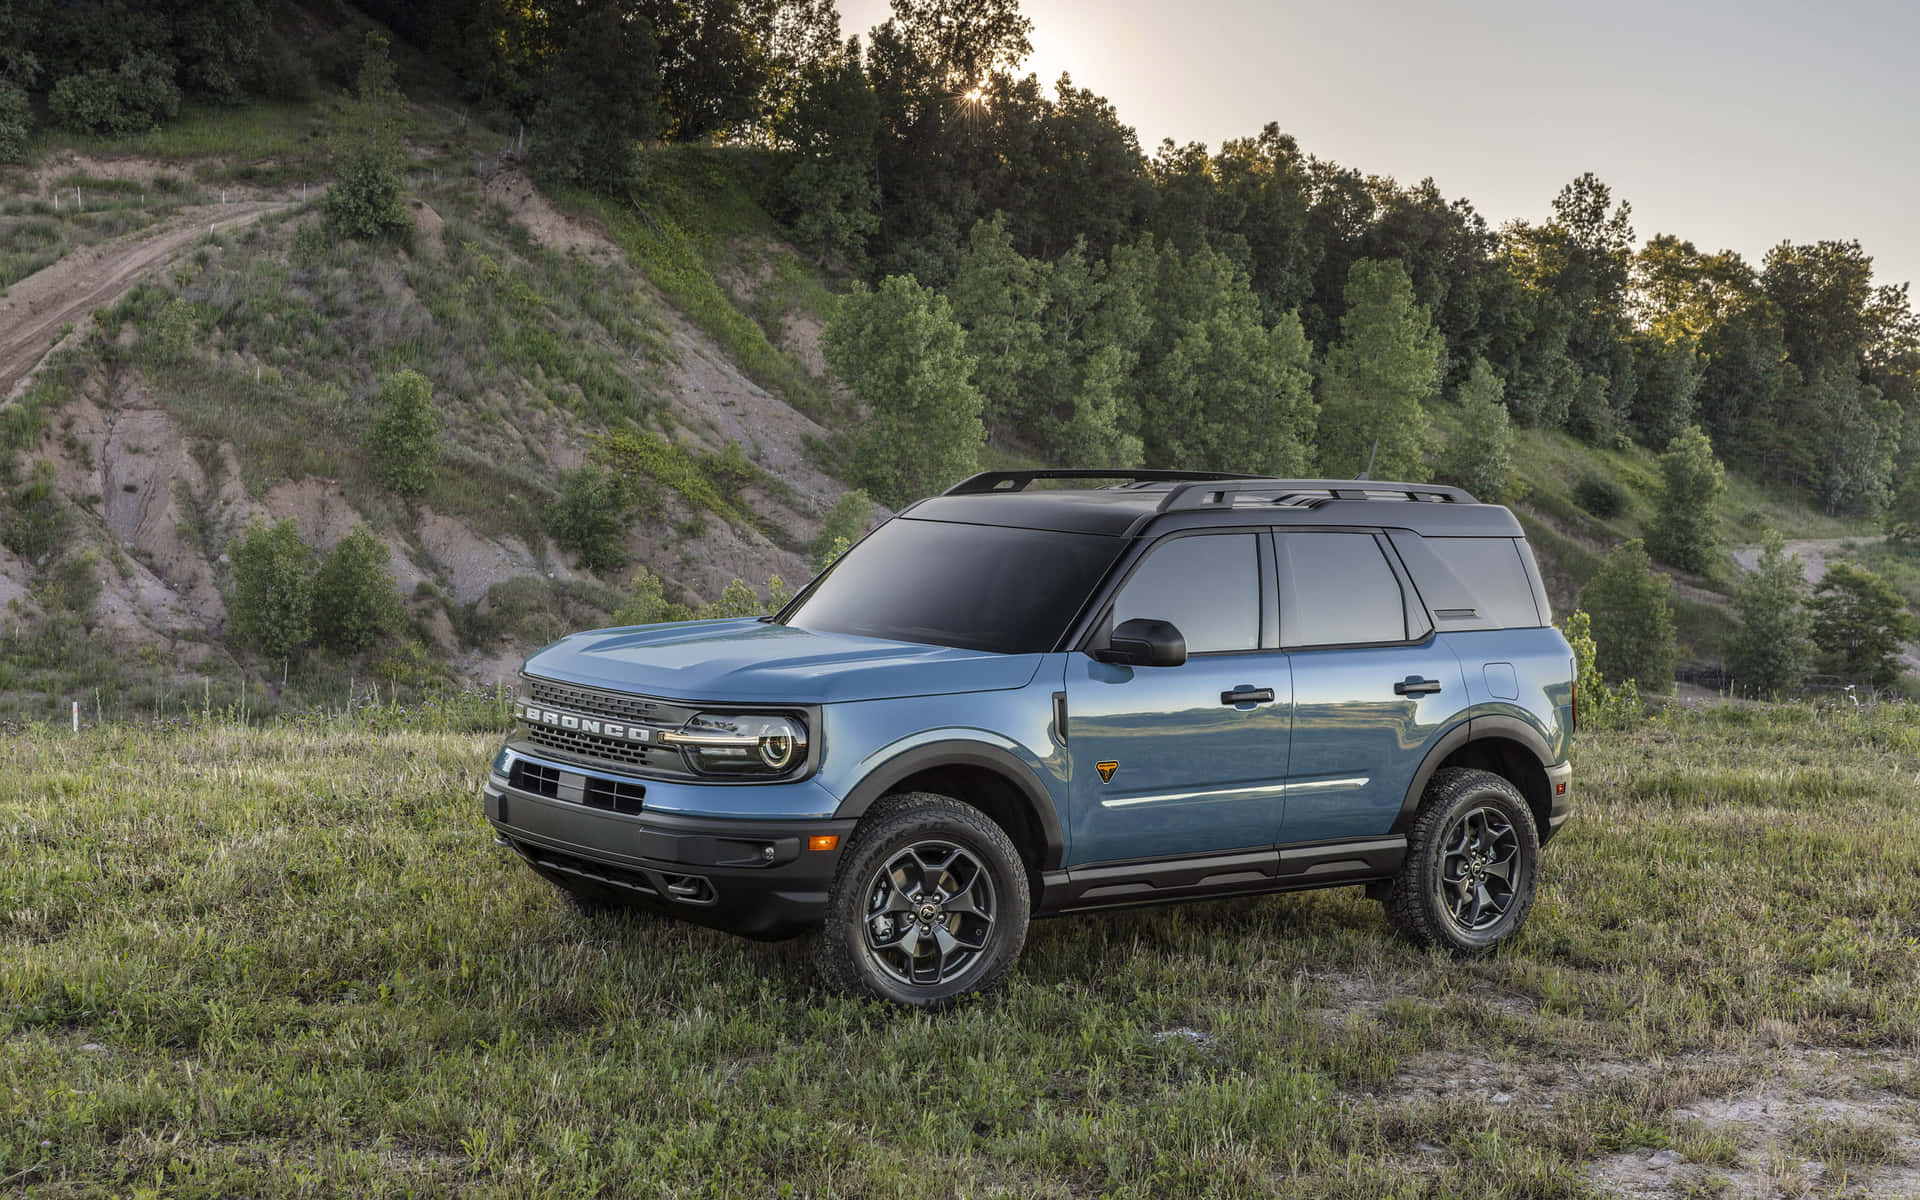 'Explore the rugged great outdoors in the iconic Ford Bronco'